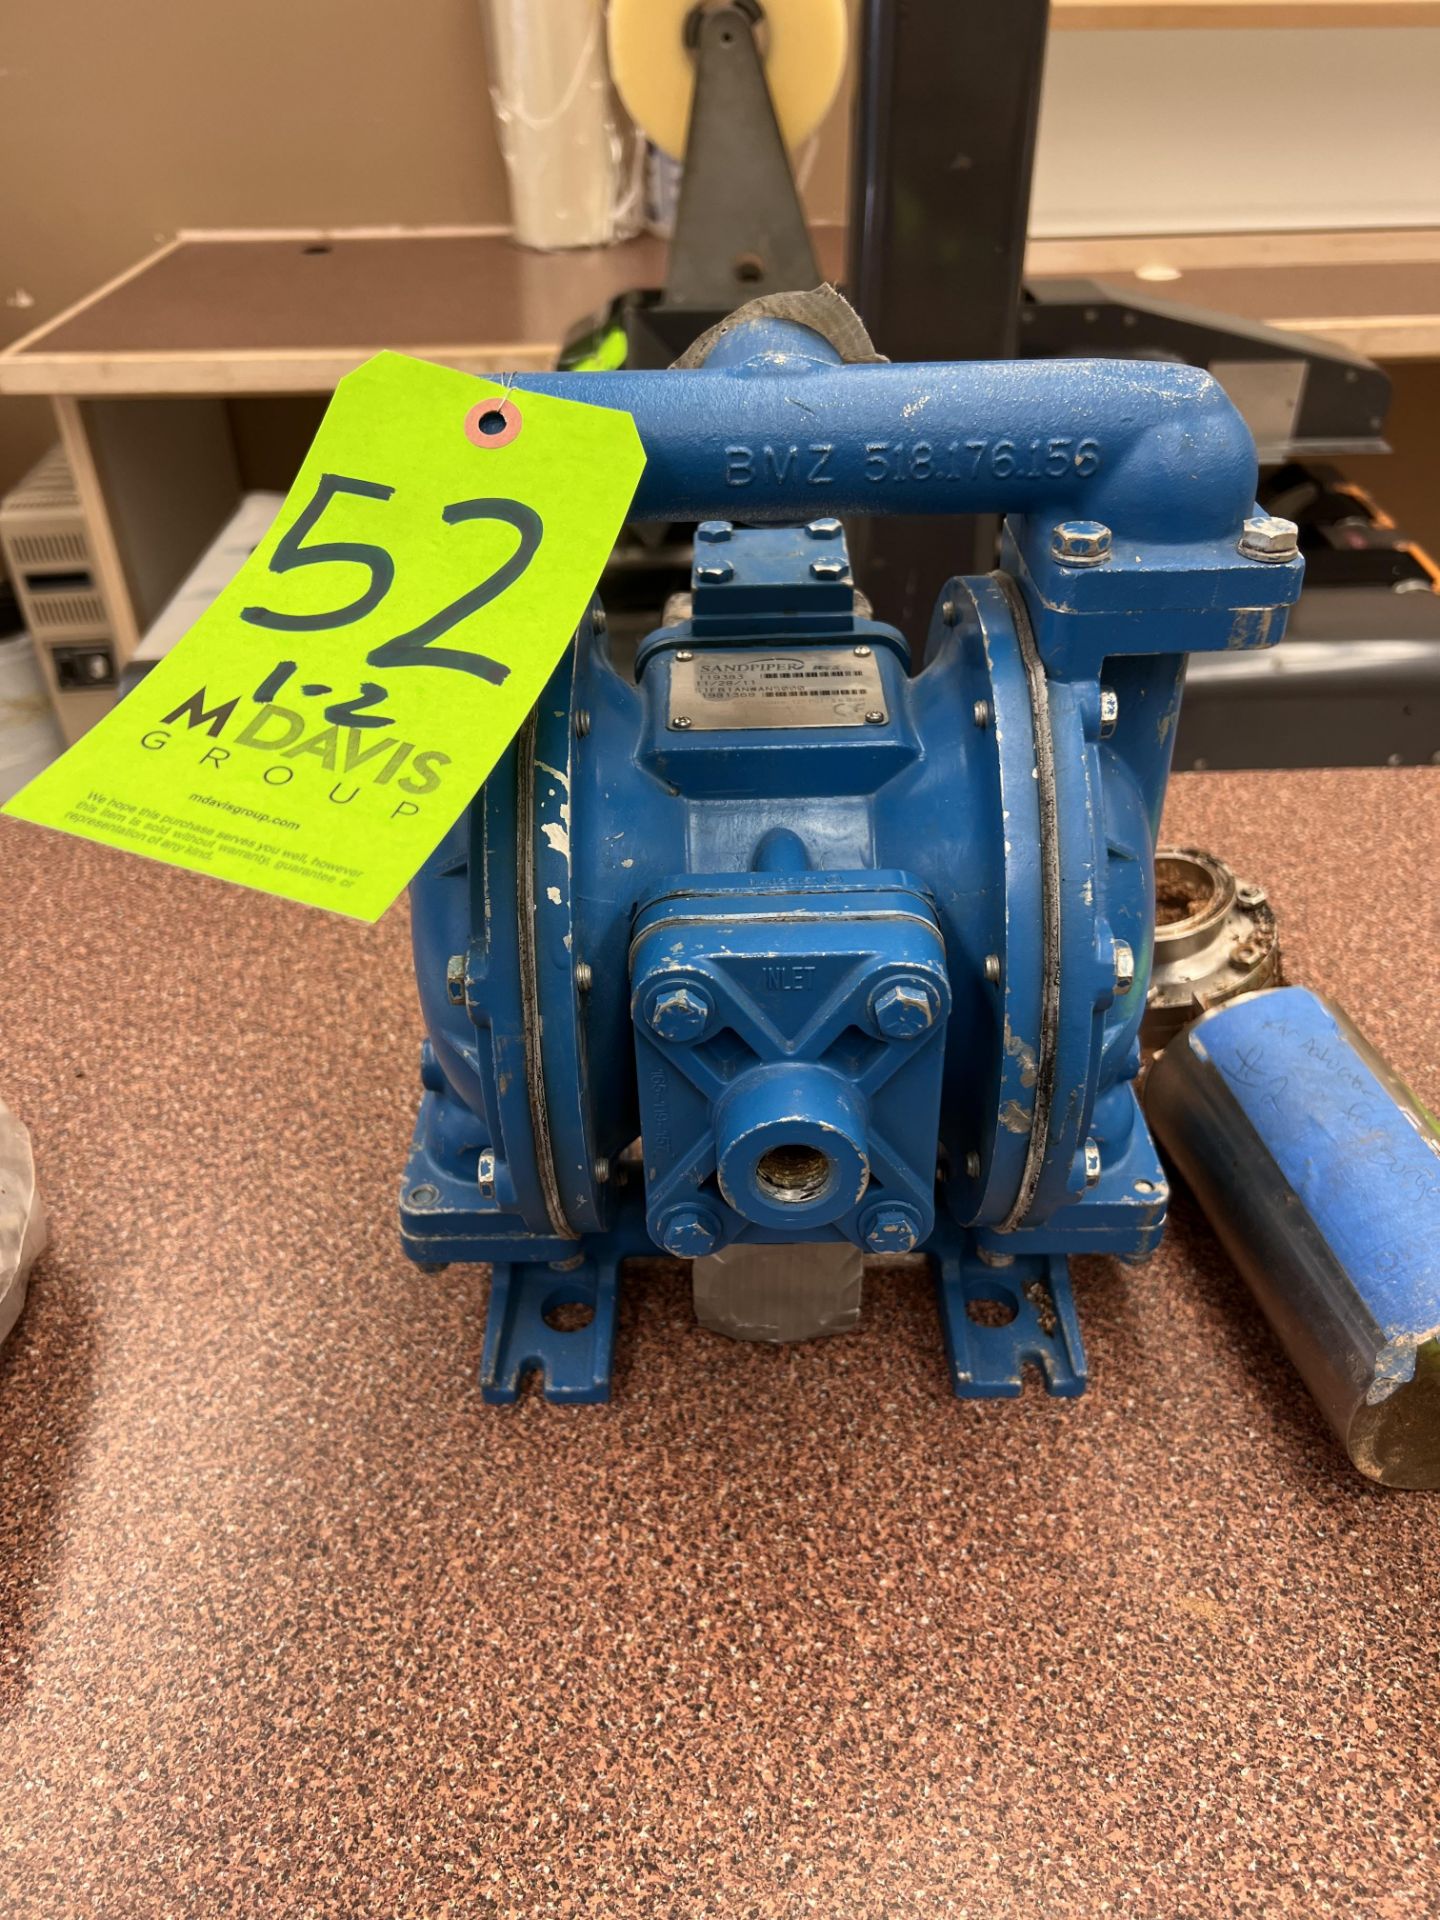 SANDPIPER 1" BELLOW DIAPHRAGM PUMP, S/N 1981368, 125 PSI, INCLUDES EGMO PNEUMATIC 2" S/S BUTTERFLY